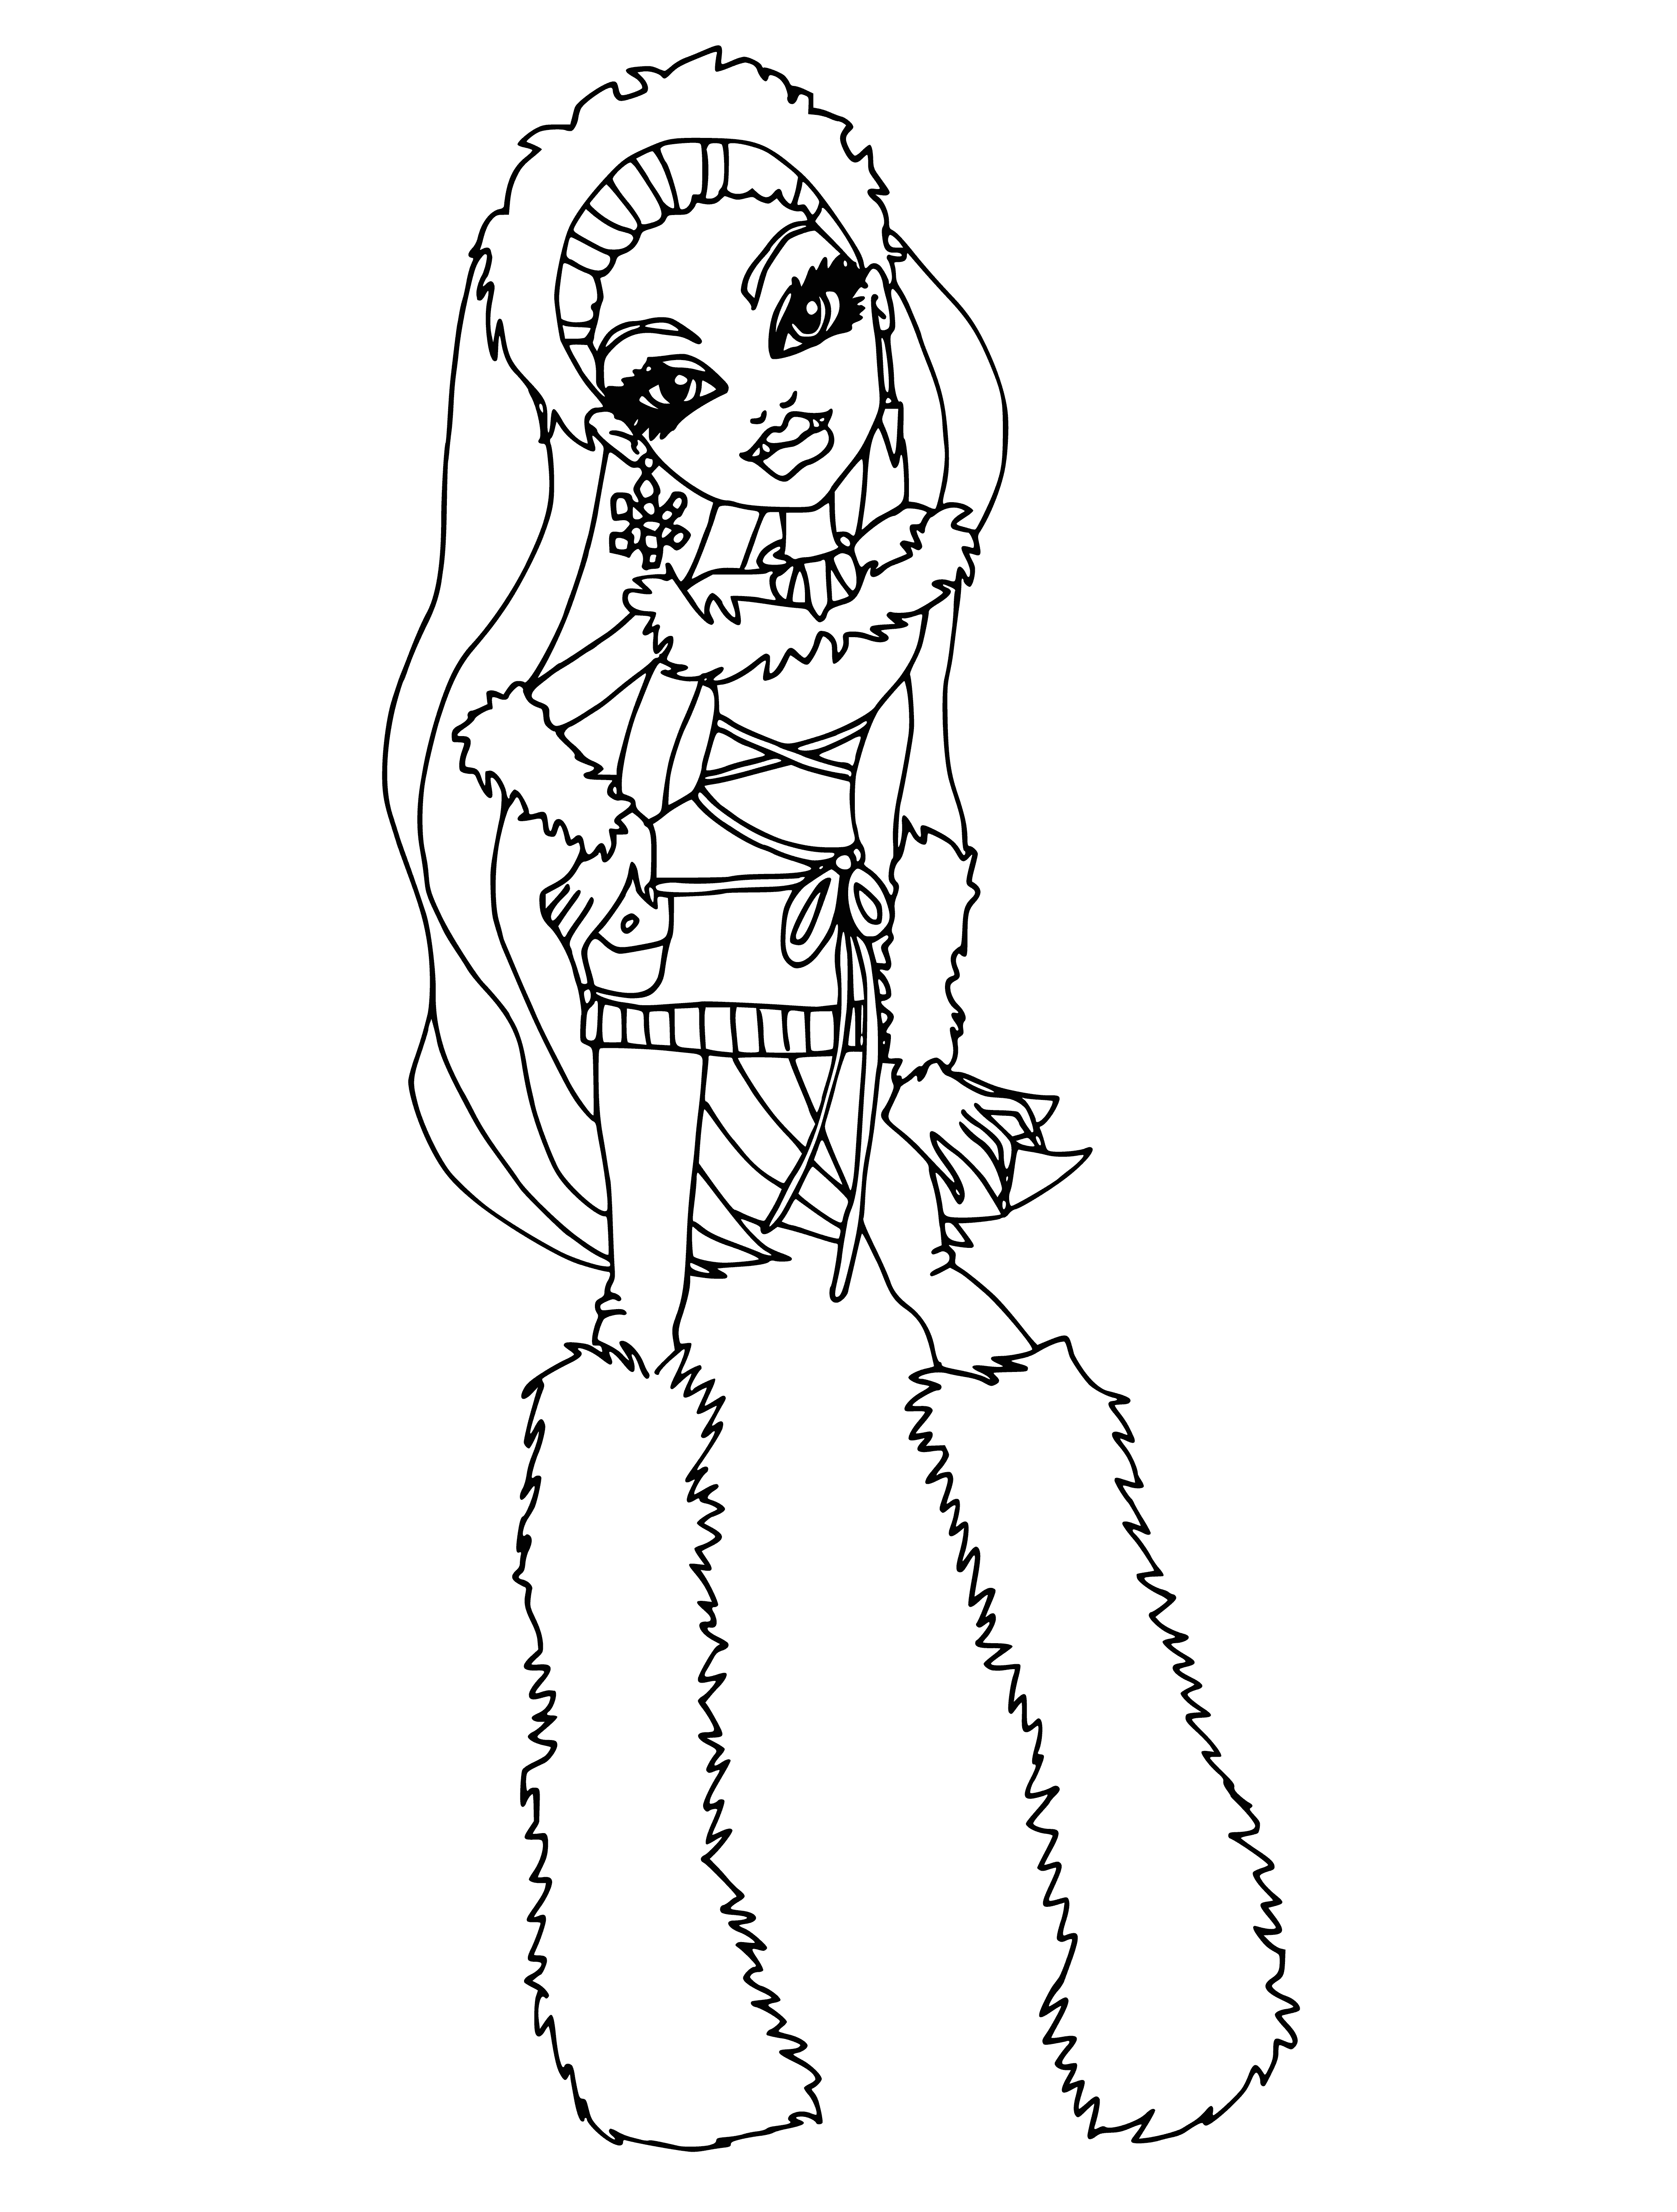 coloring page: Abby stands in front of a dark, spooky castle, wearing a purple dress with her long, white hair blowing in the wind. She looks ready to enter.